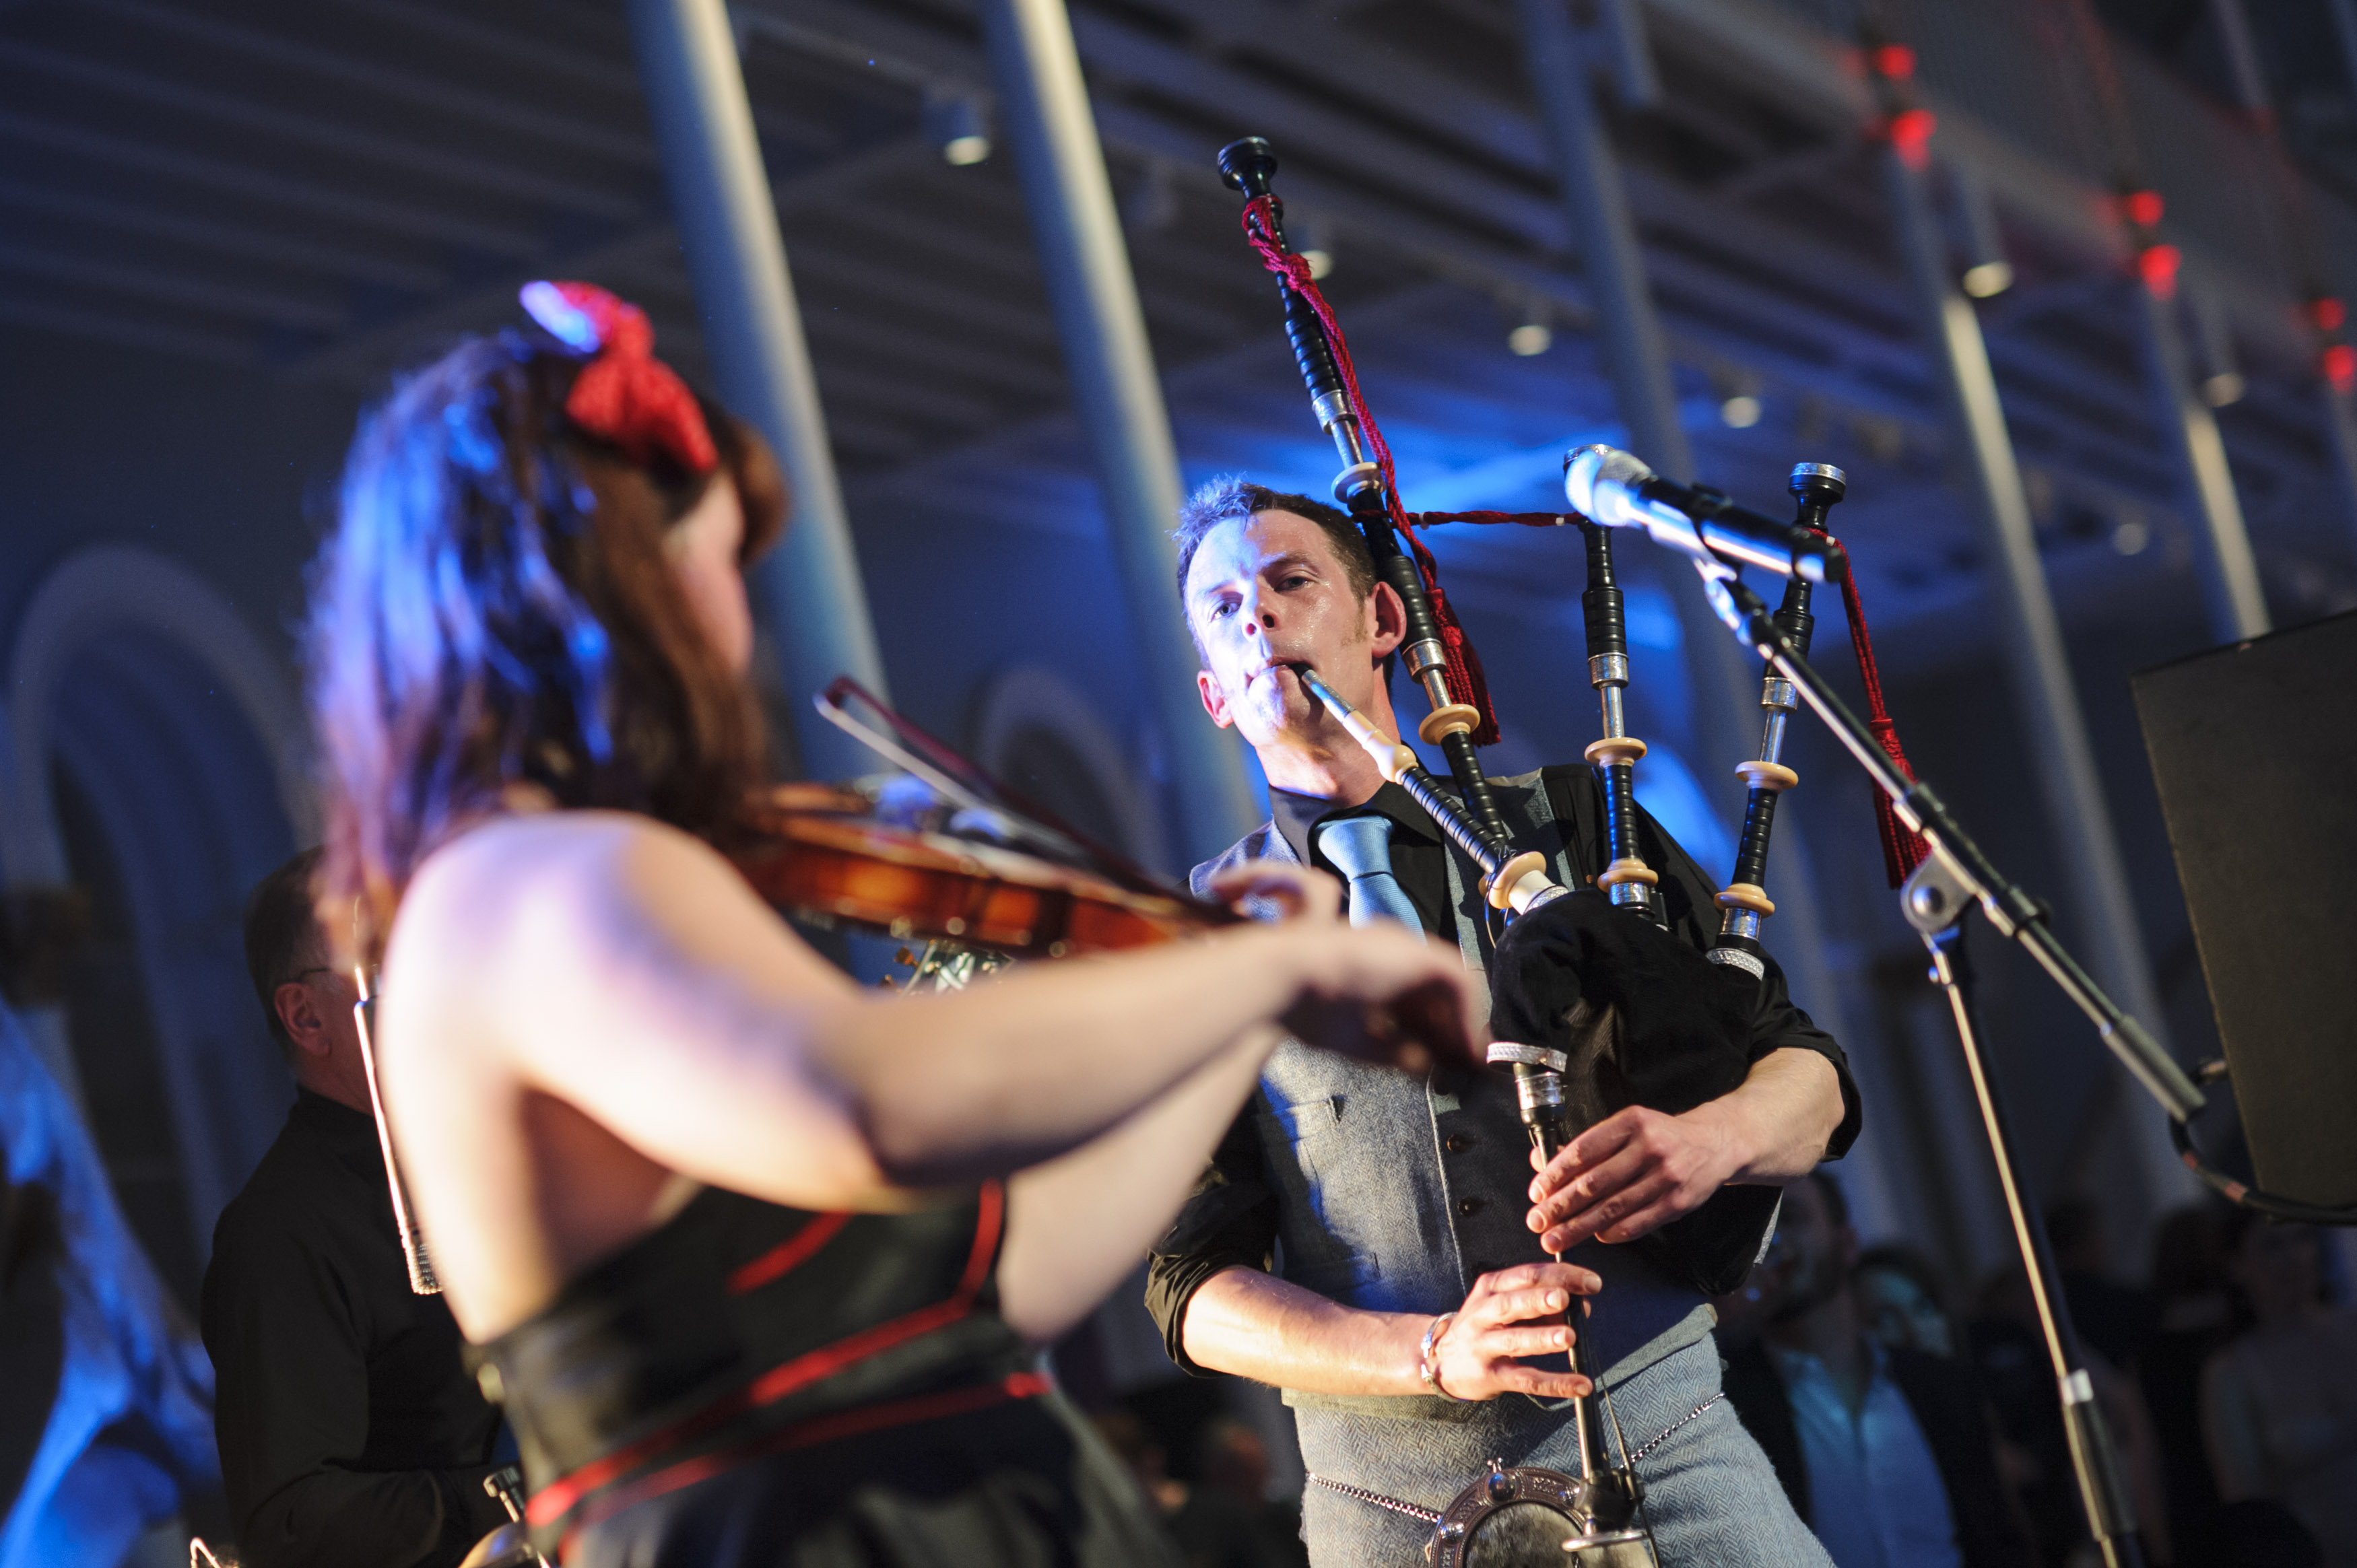 National Museum of Scotland, ceilidh performance band